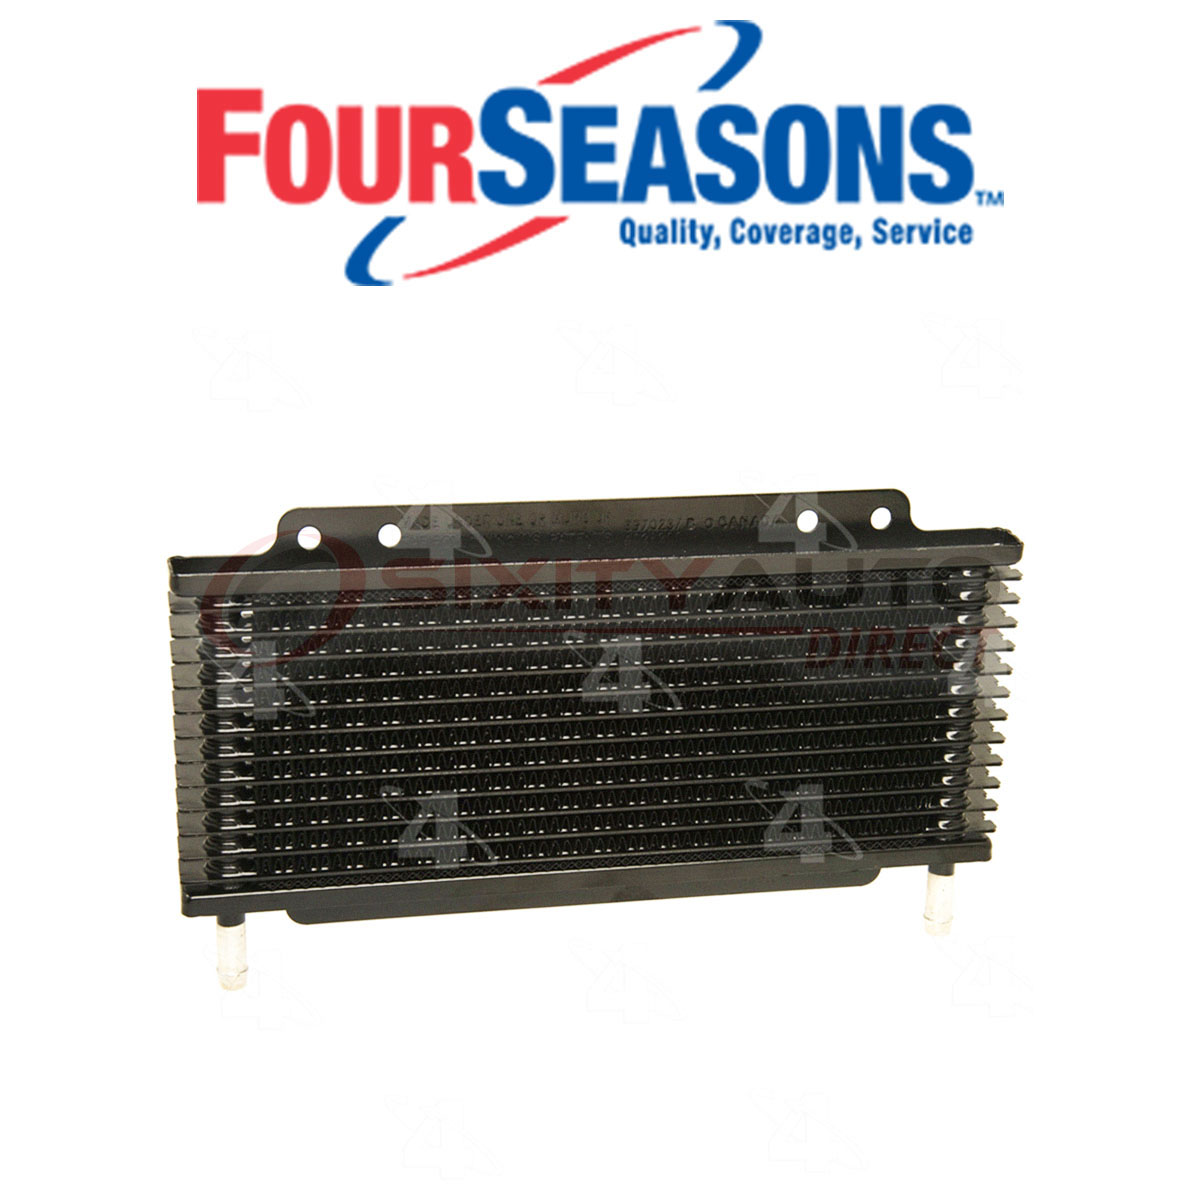 Four Seasons Transmission Oil Cooler for 1997-2014 Jeep Grand Cherokee 3.0L gv | eBay 2012 Jeep Grand Cherokee Transmission Cooler Replacement